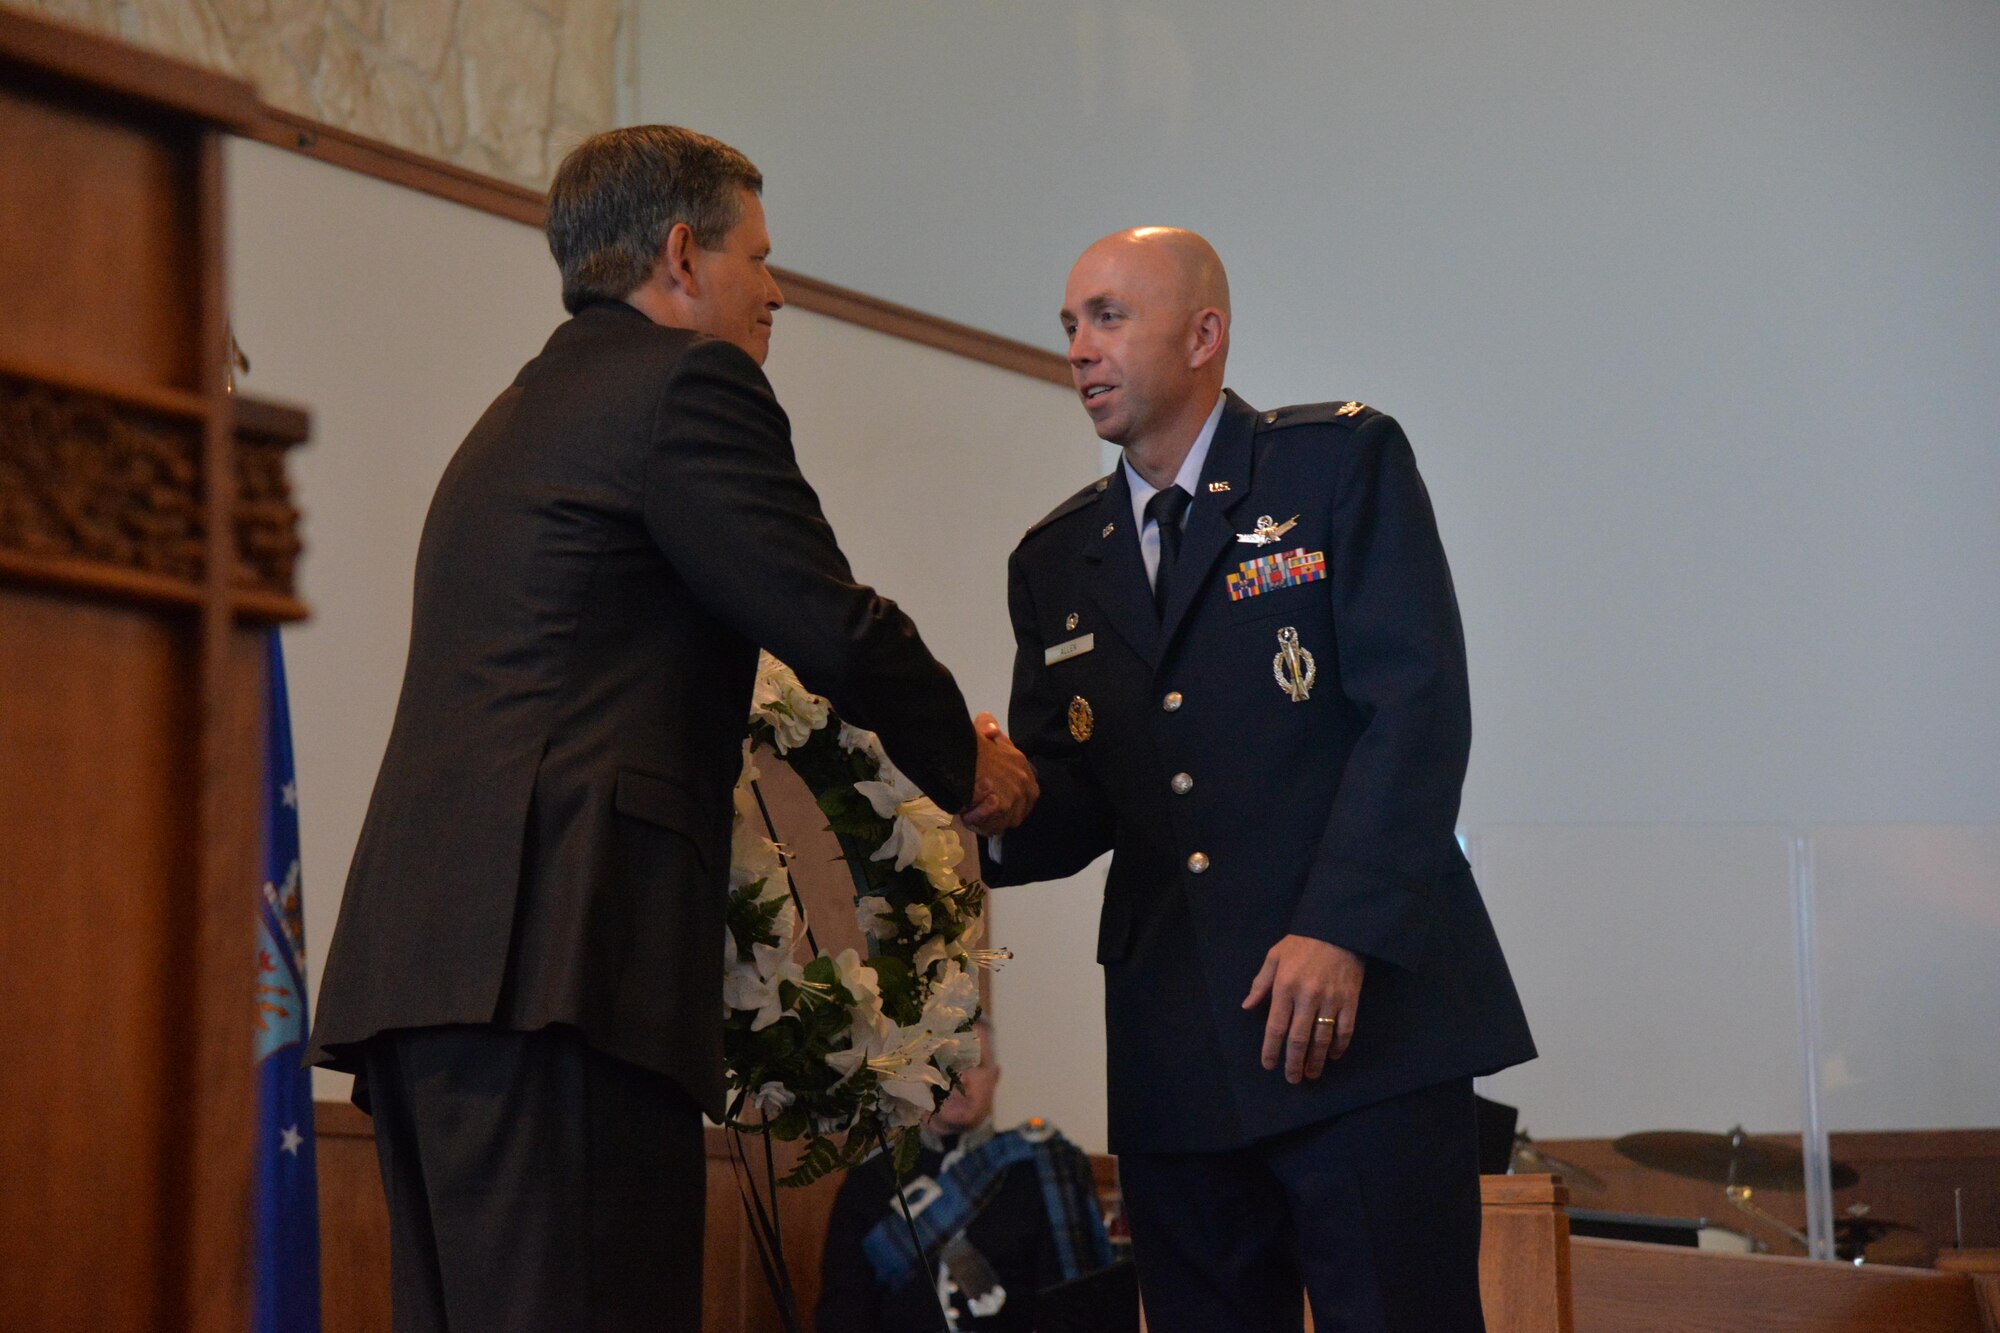 Col. Ron Allen, 341st Missile Wing commander, right, shakes hands with Montana Sen. Steve Daines, after the laying of the wreath during the 9/11 Remembrance ceremony Sept. 9, 2016, at Malmstrom Air Force Base, Mont. The wreath symbolizes beauty and brevity of life and memories of those who lost their lives 15 years ago and those who fight to keep the country safe and secure. (U.S. Air Force photo/Airman 1st Class Daniel Brosam)